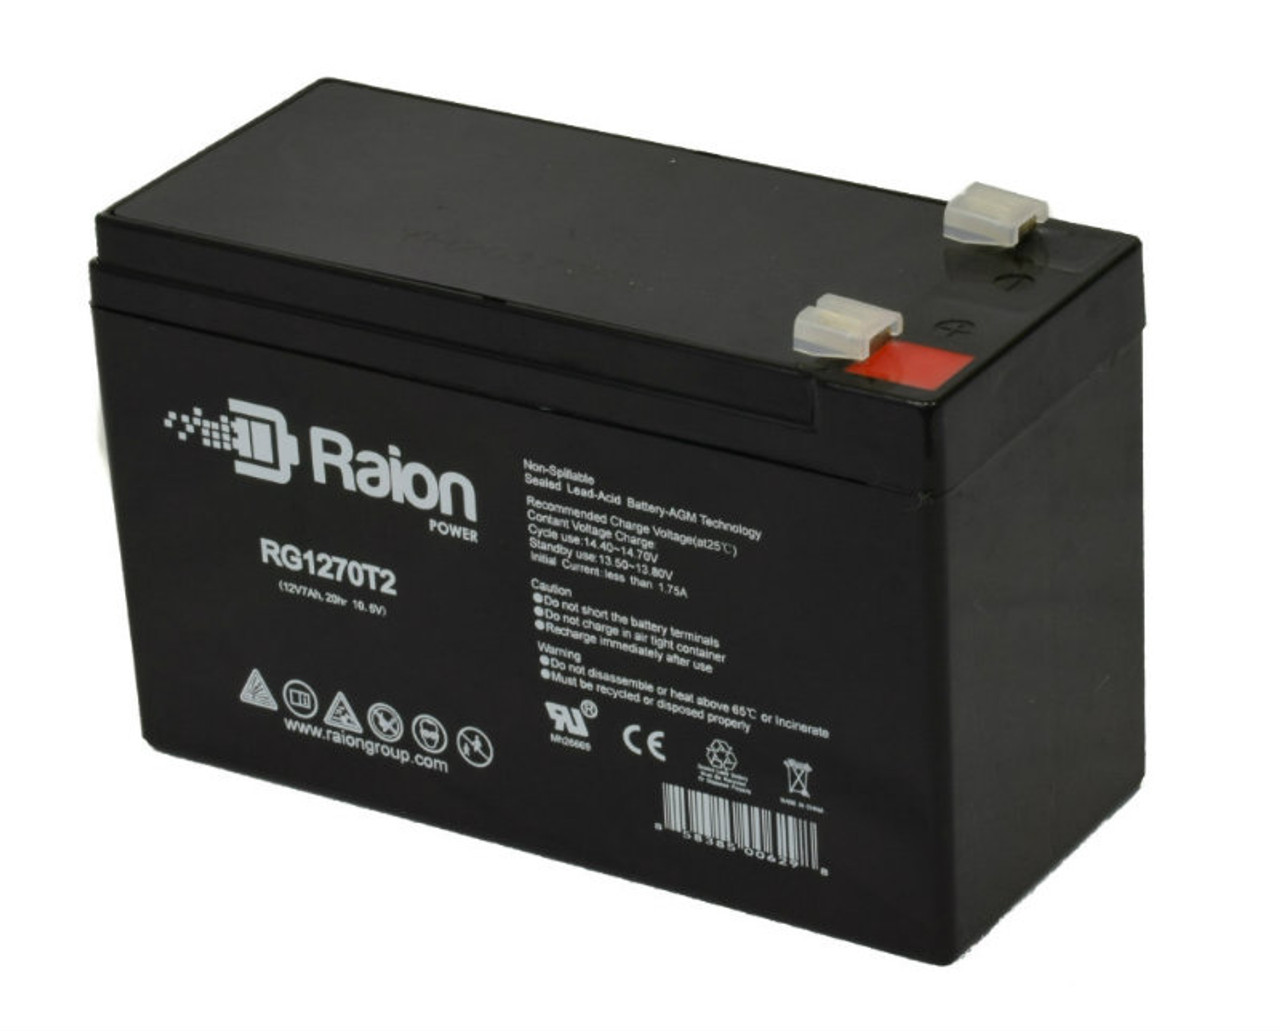 Raion Power RG1270T1 12V 7Ah Non-Spillable Replacement Battery for Douglas DBG12-7F F1